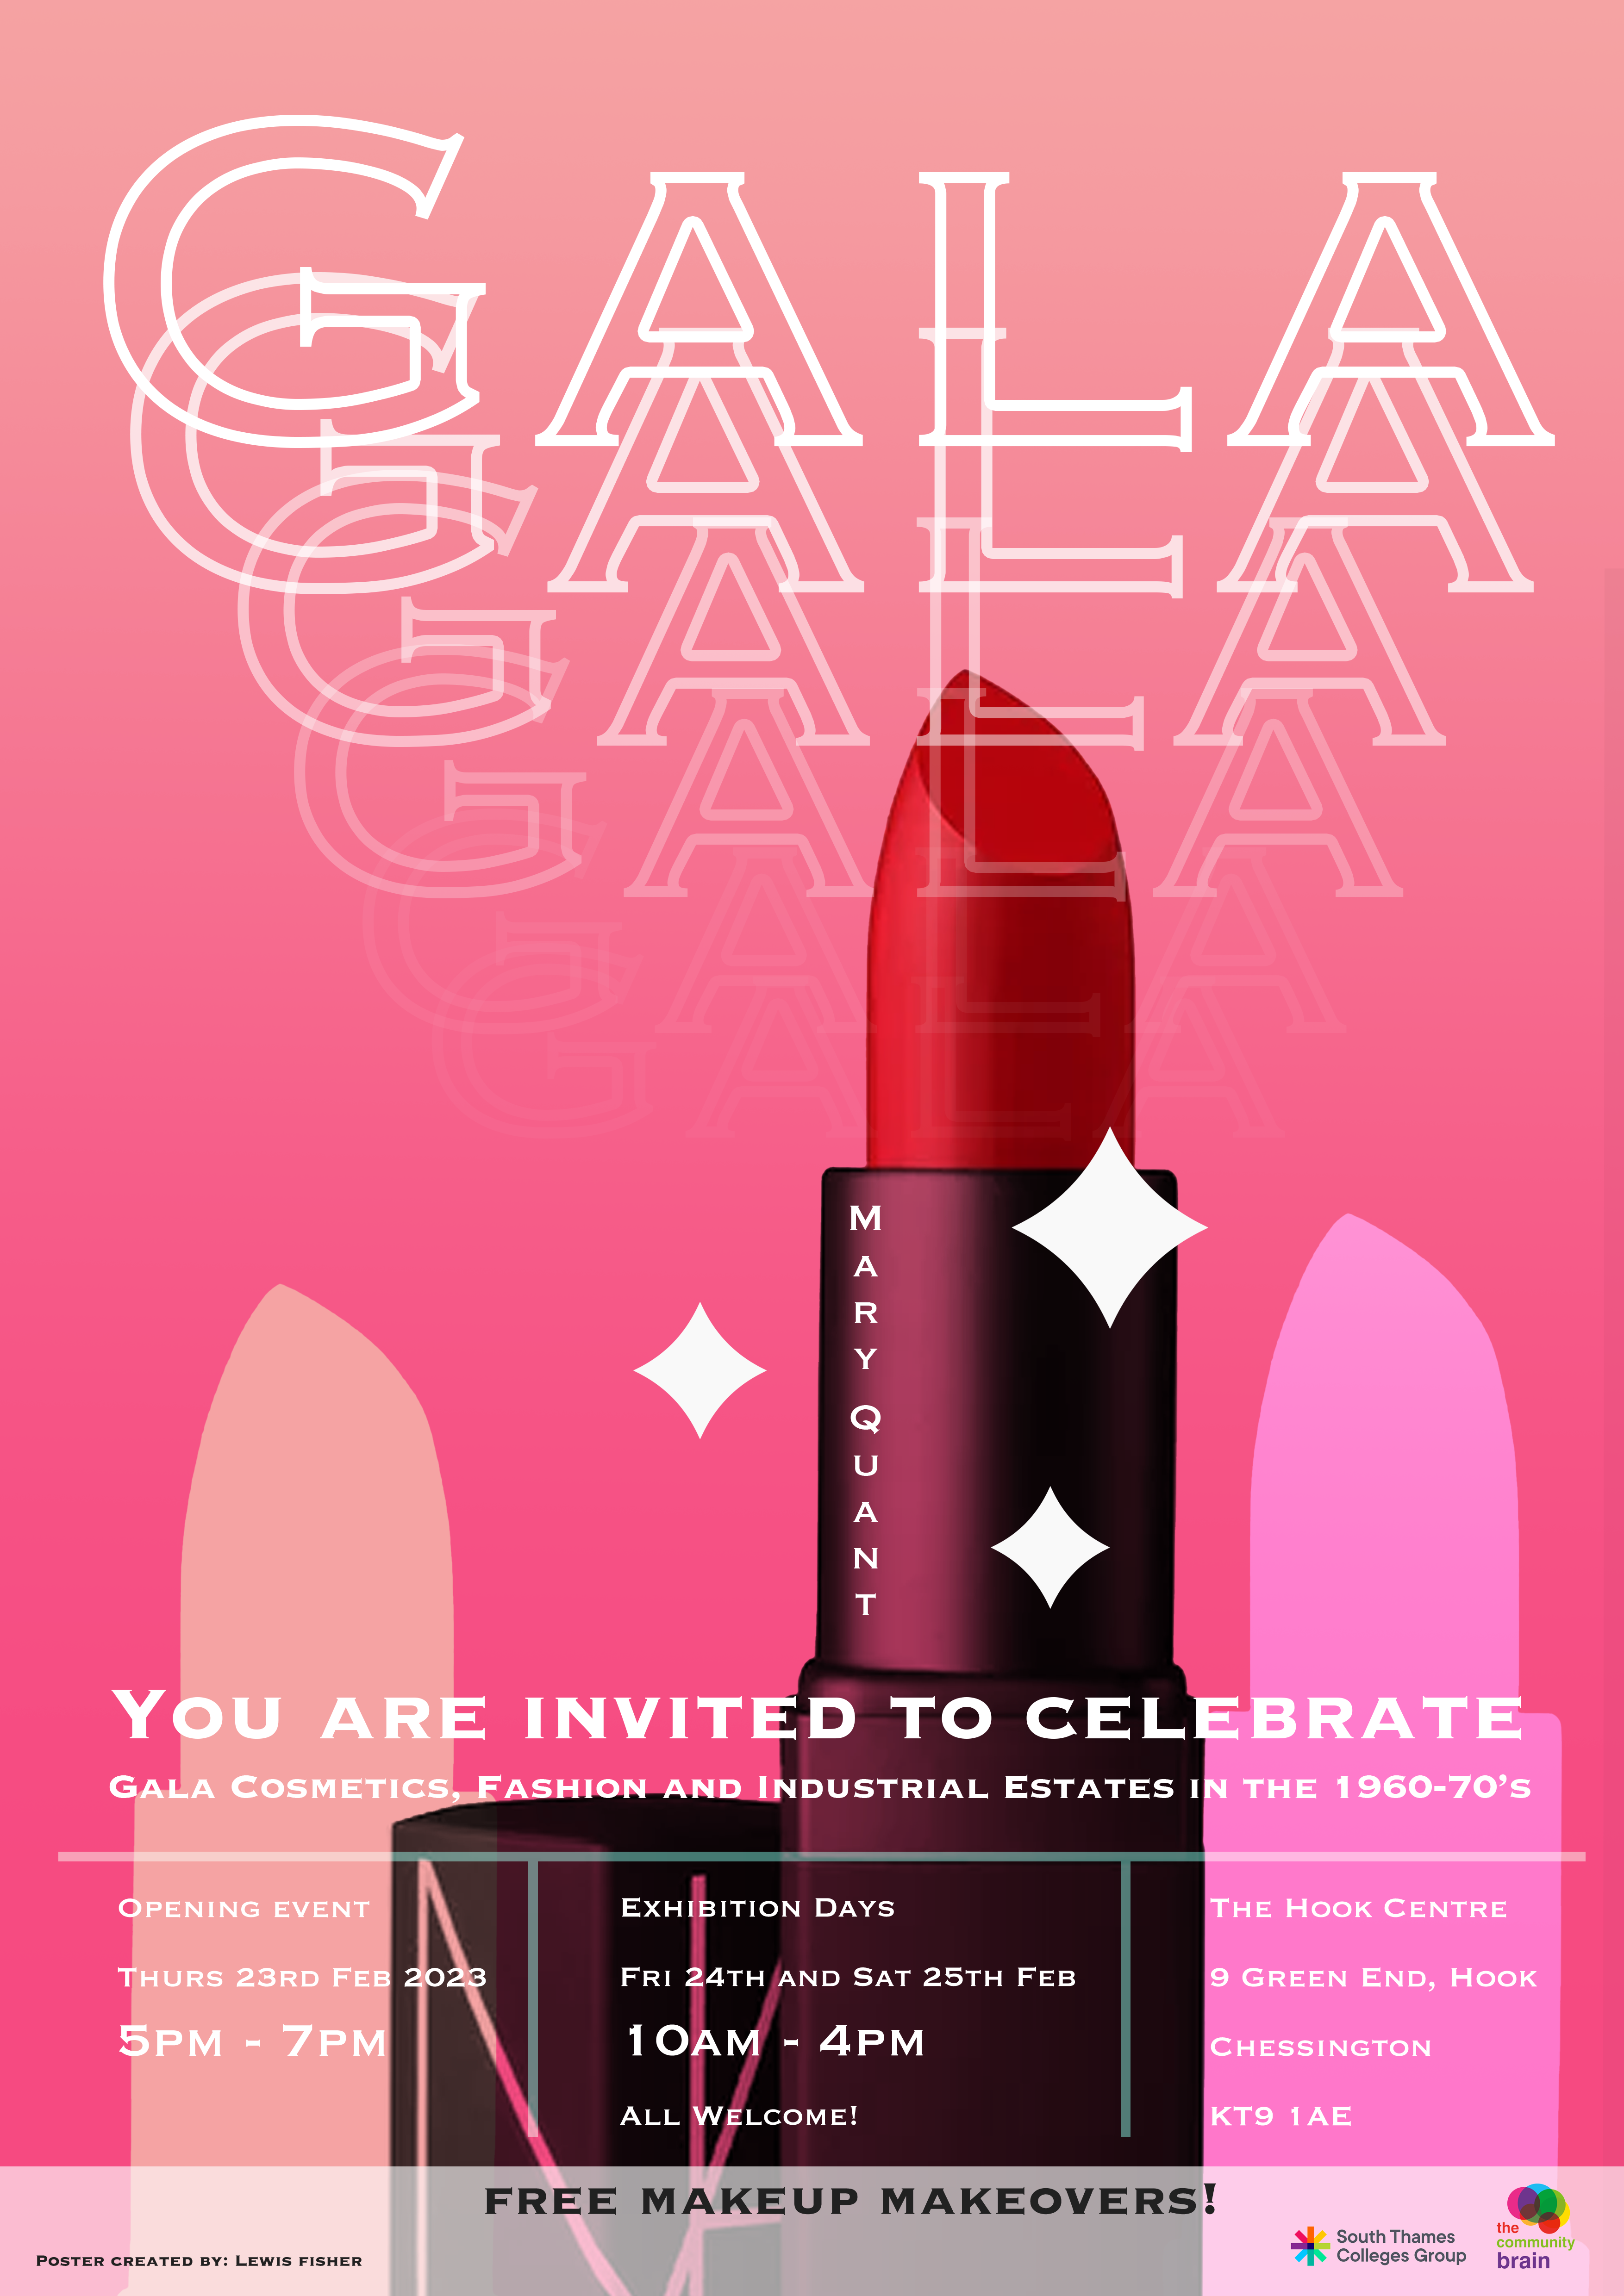 Gala Cosmetics, Fashion & Industrial Estates exhibition - All Welcome!